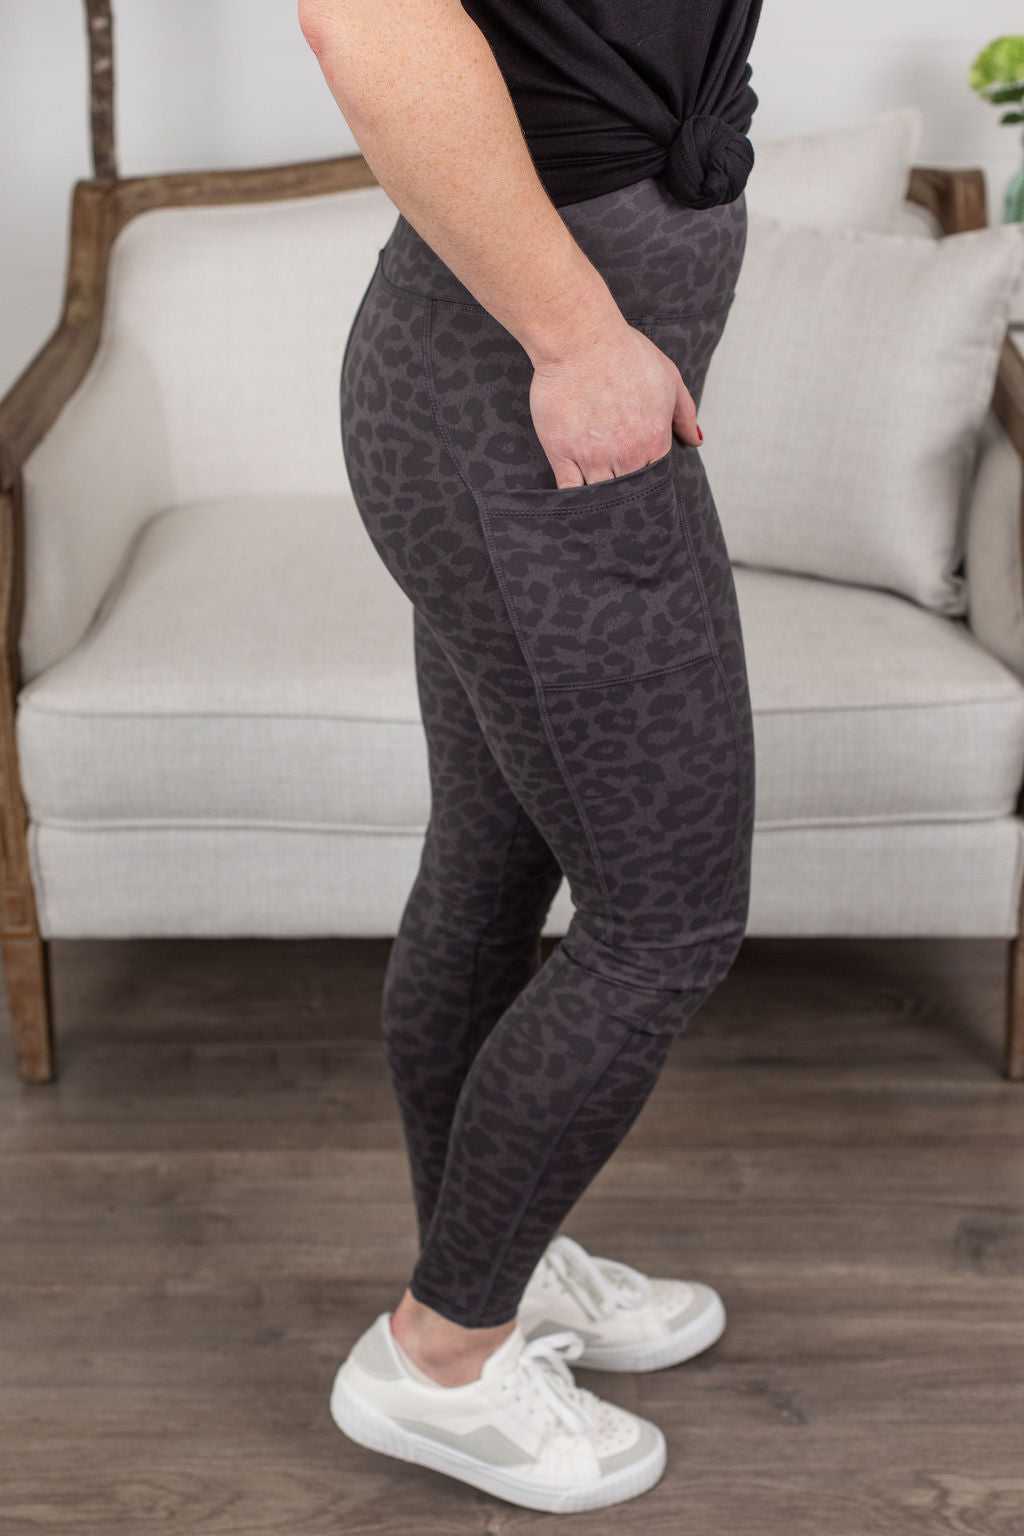 Athleisure Leggings - Charcoal Leopard – The Wild Fern Boutique